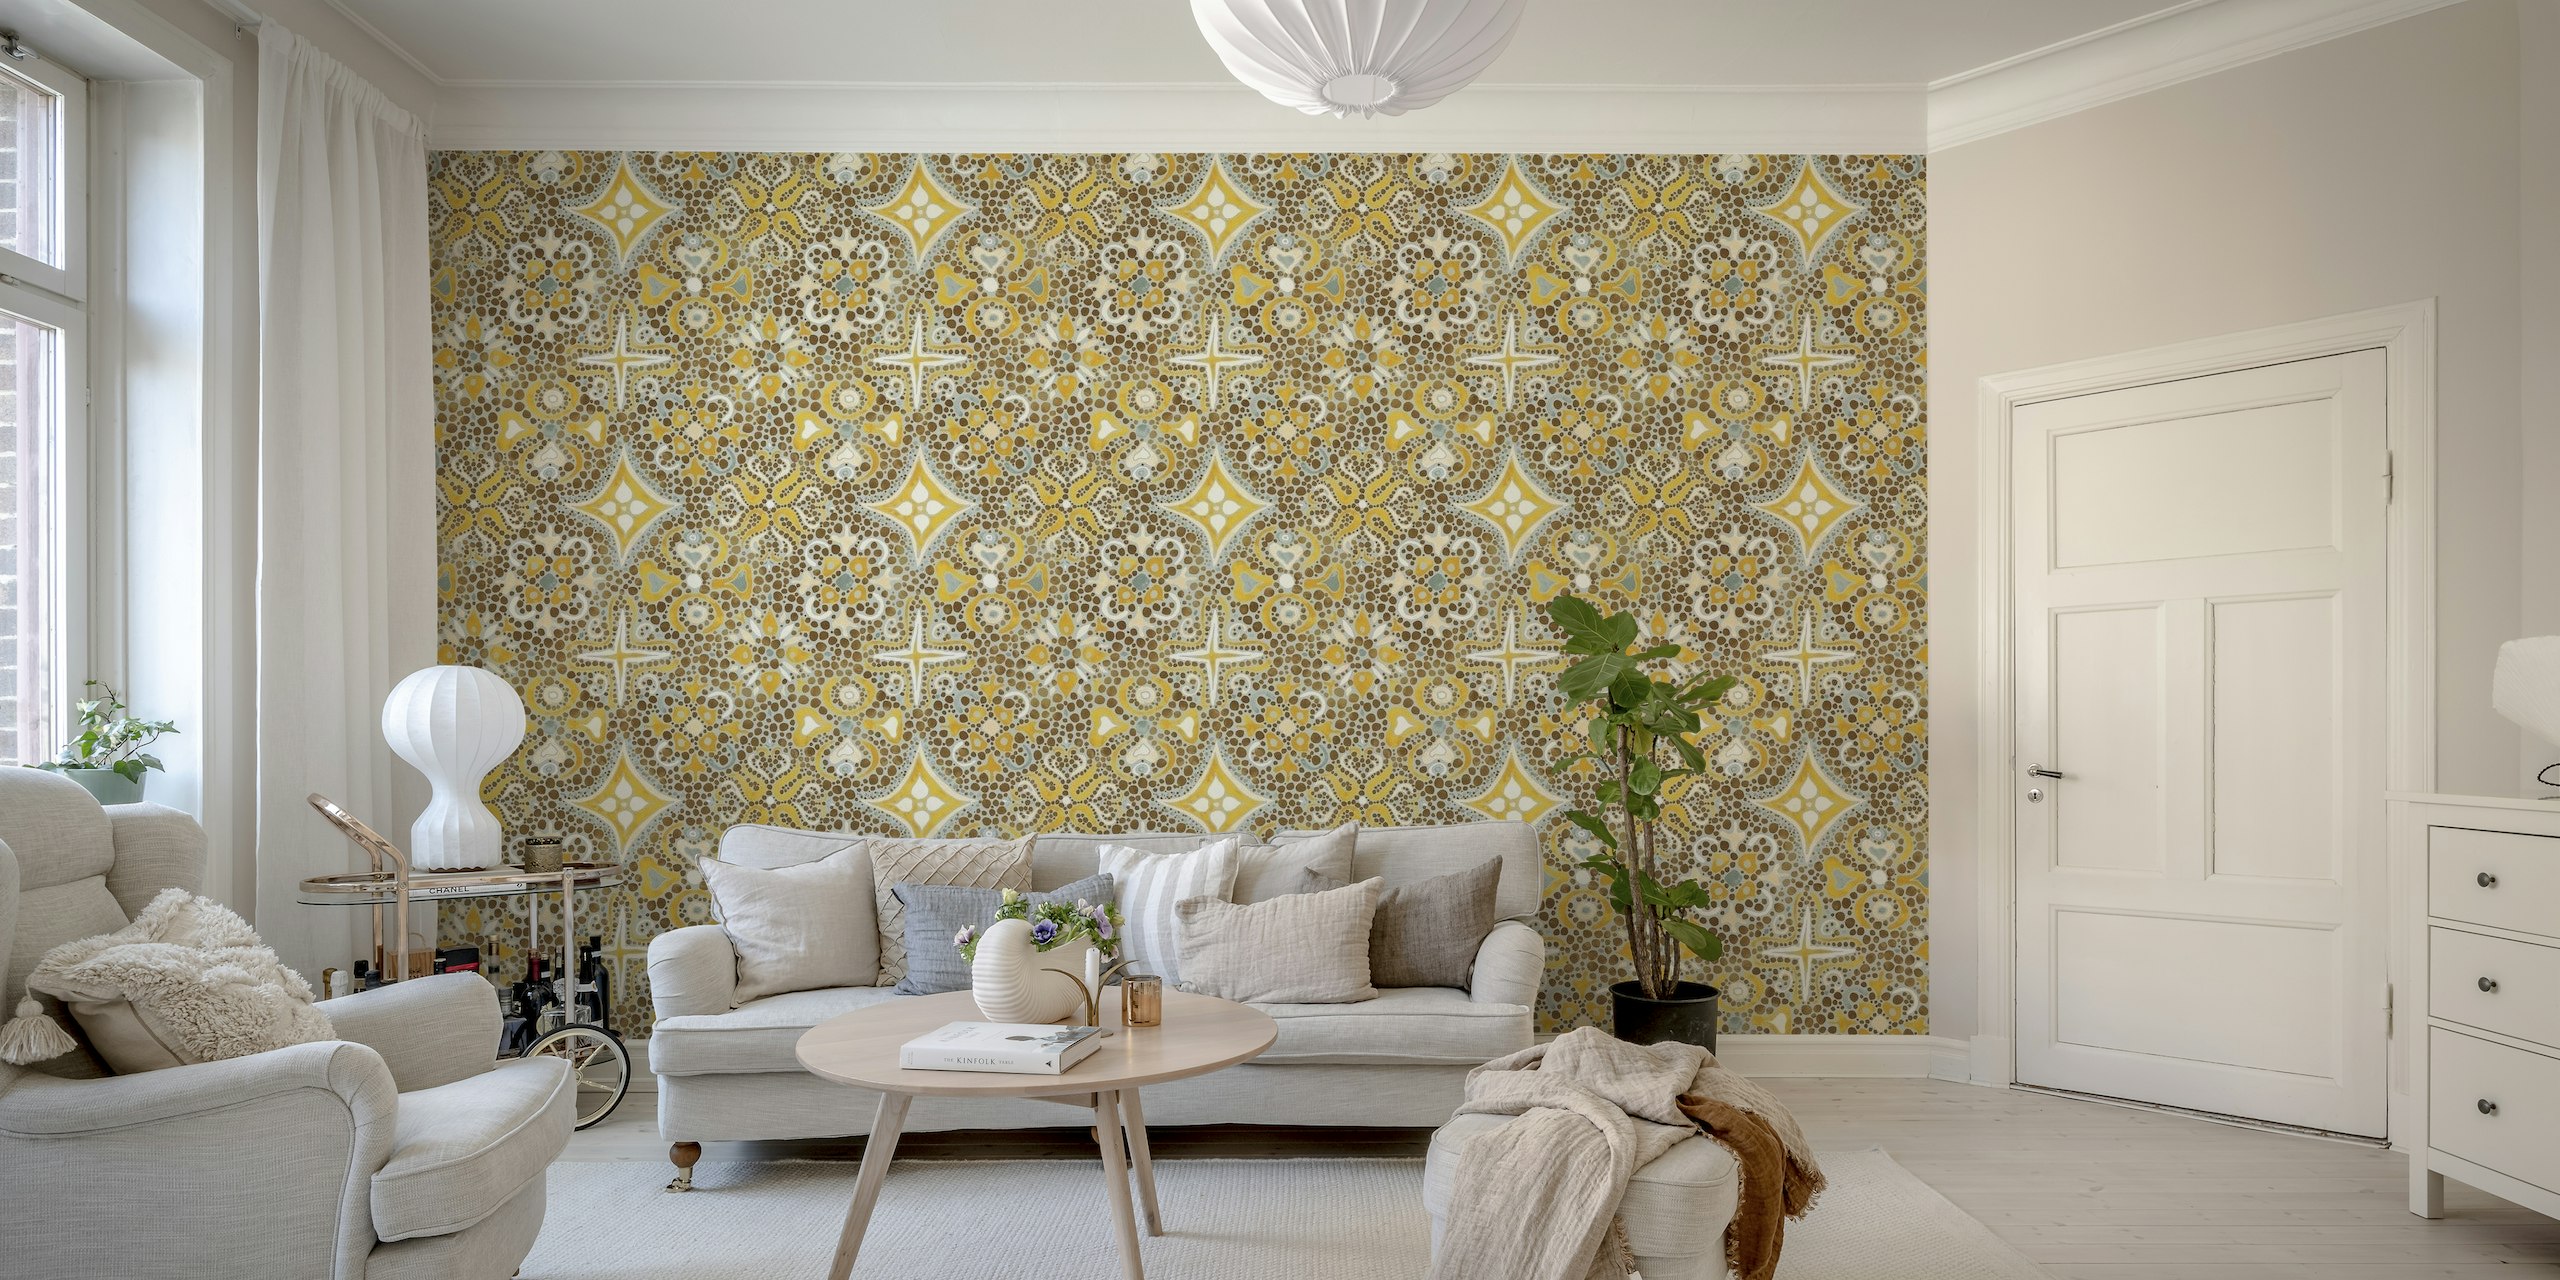 Old yellow mosaic wall mural with intricate maximalist patterns